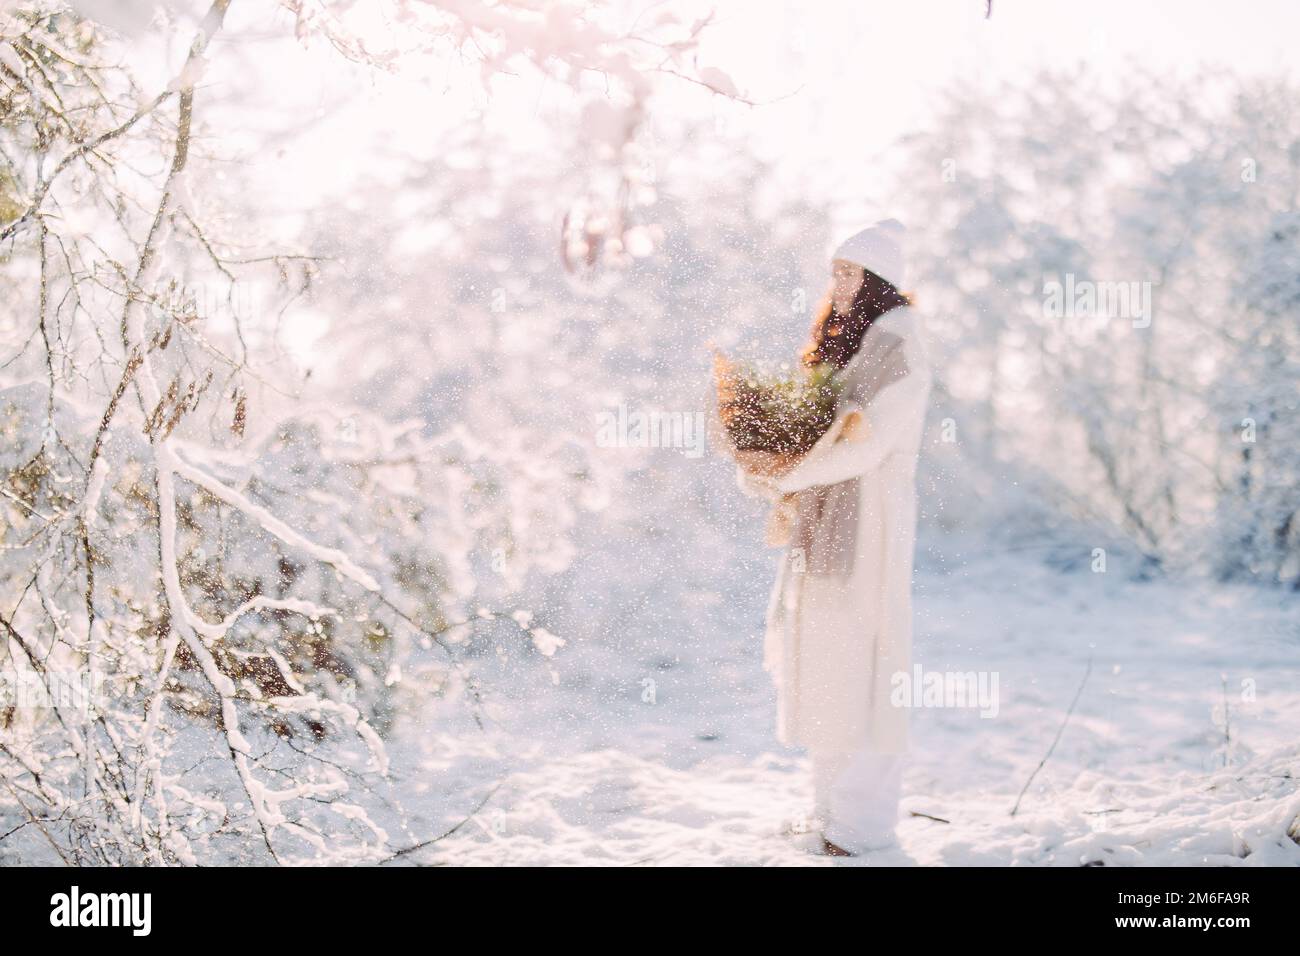 Happy young woman walks in forest among snow covered trees against background of snowflakes with bouquet from pine branches in her hands. Stock Photo